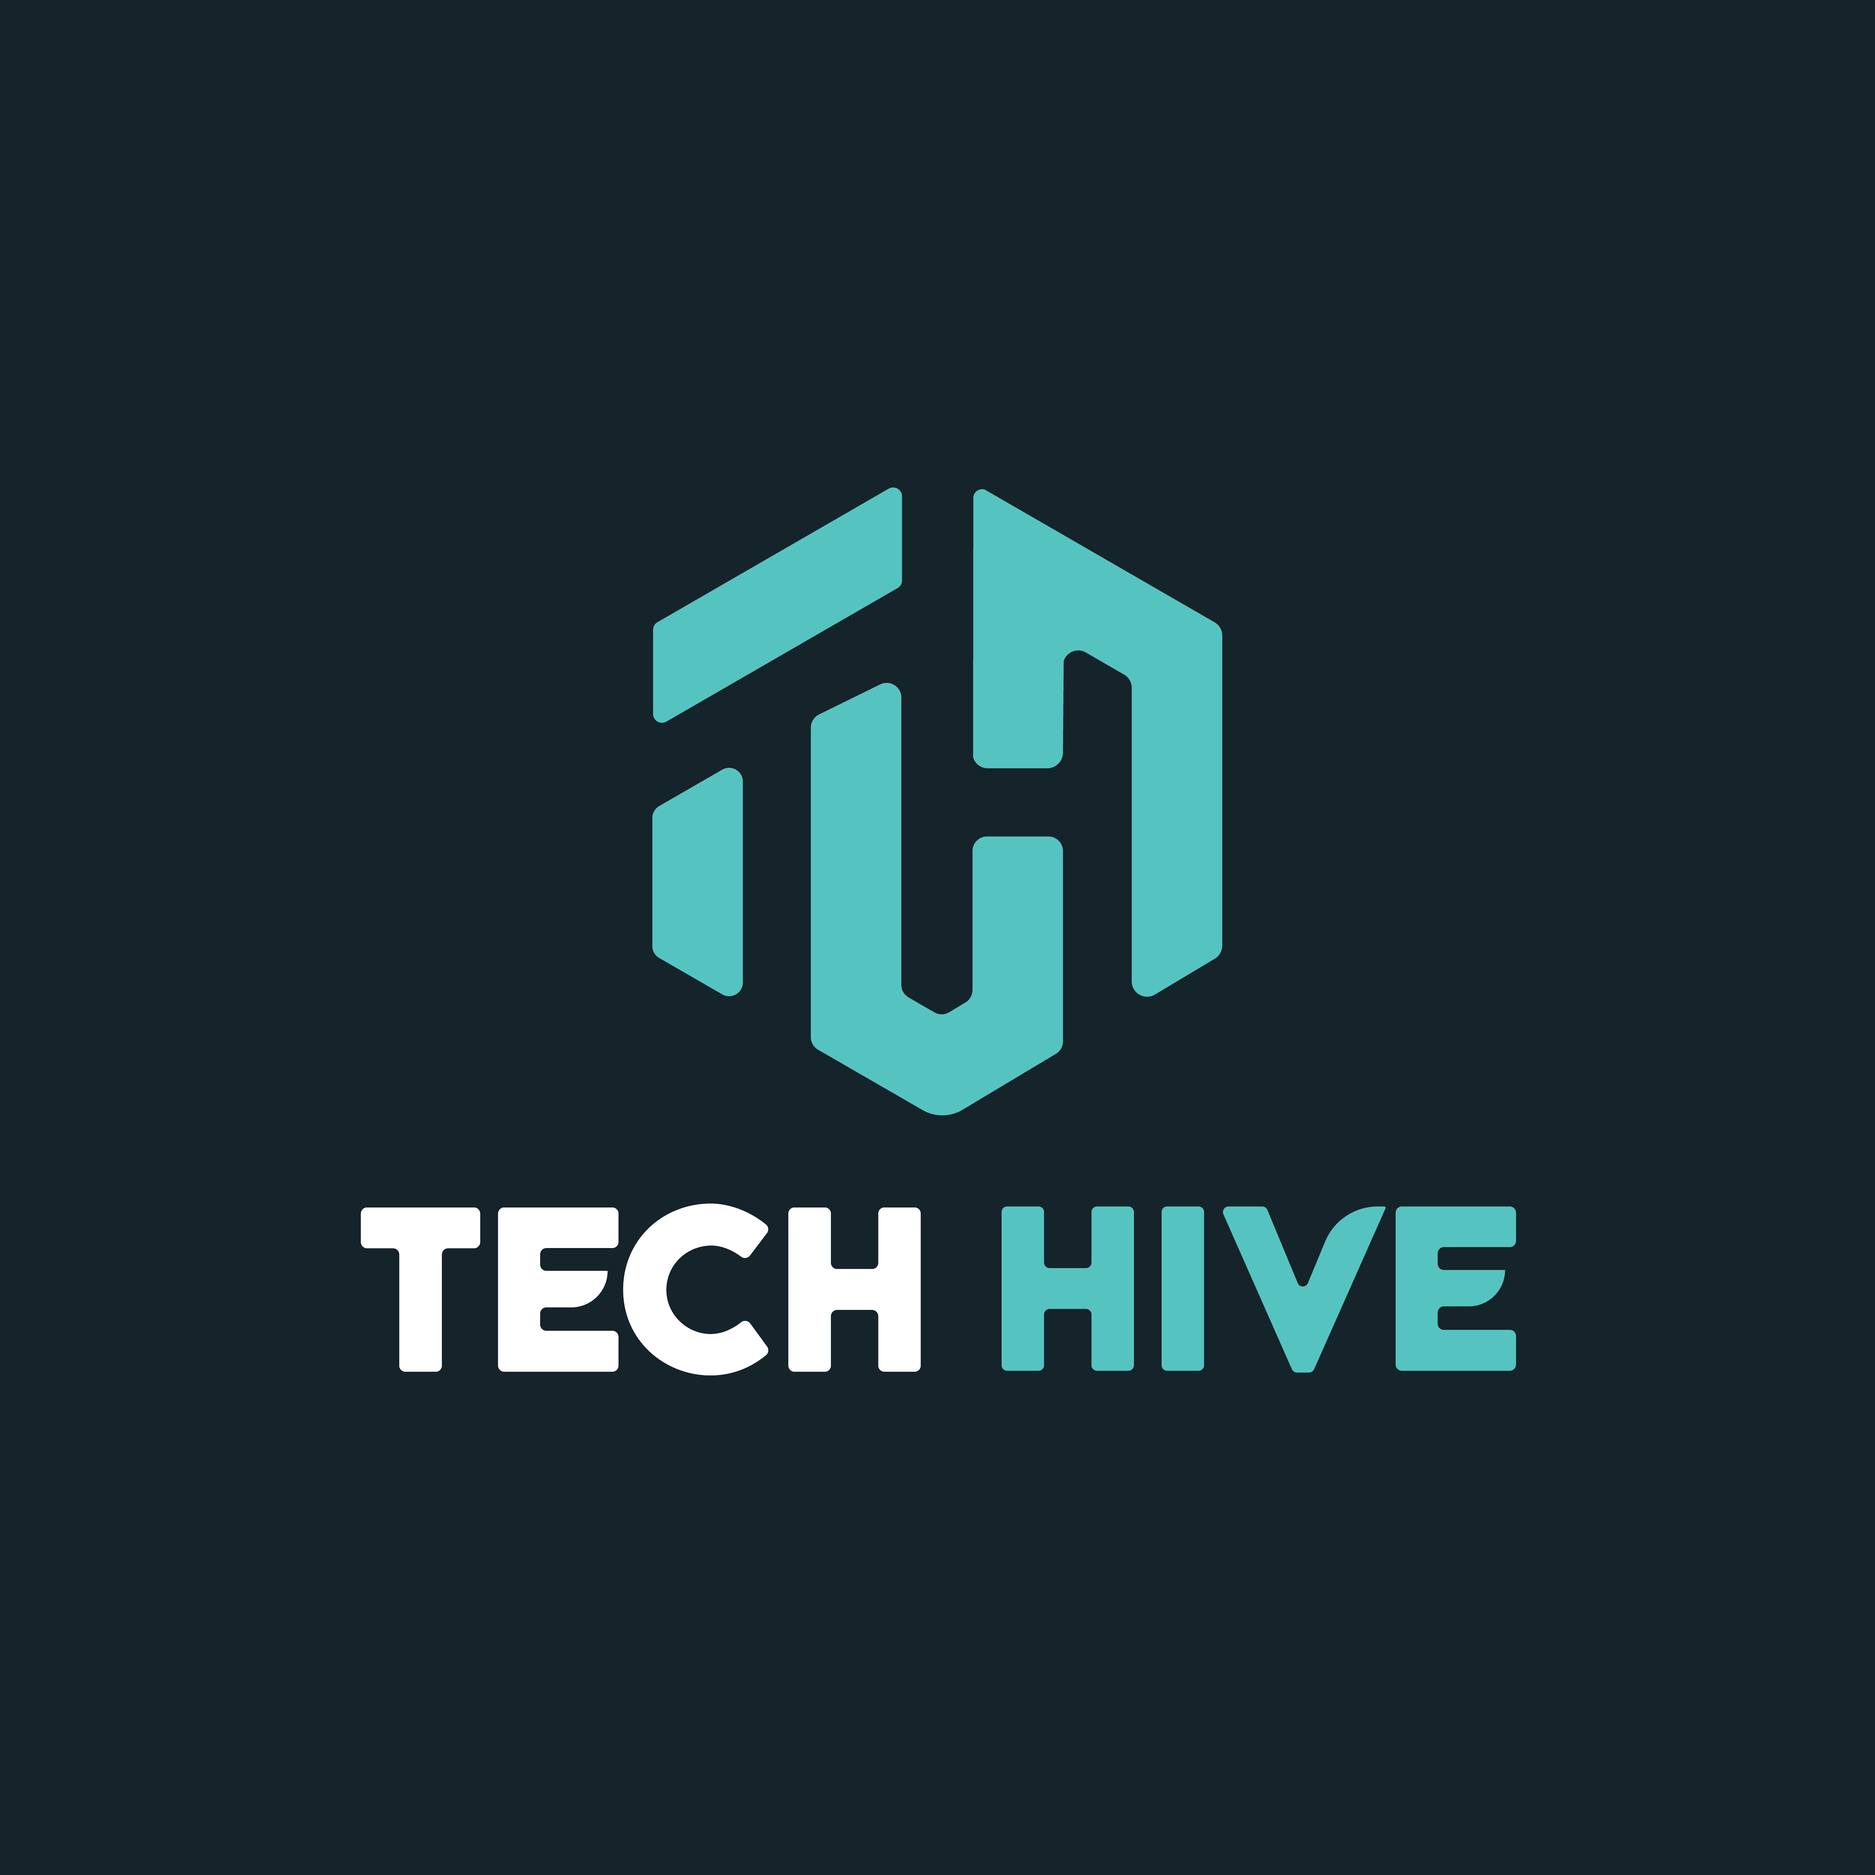 Tech Hive logo consists of the letters T and H in a light blue color and the word tech hive with black background software company in Alexandria logo consists of the letters T and H in a light blue color and the word tech hive with black background